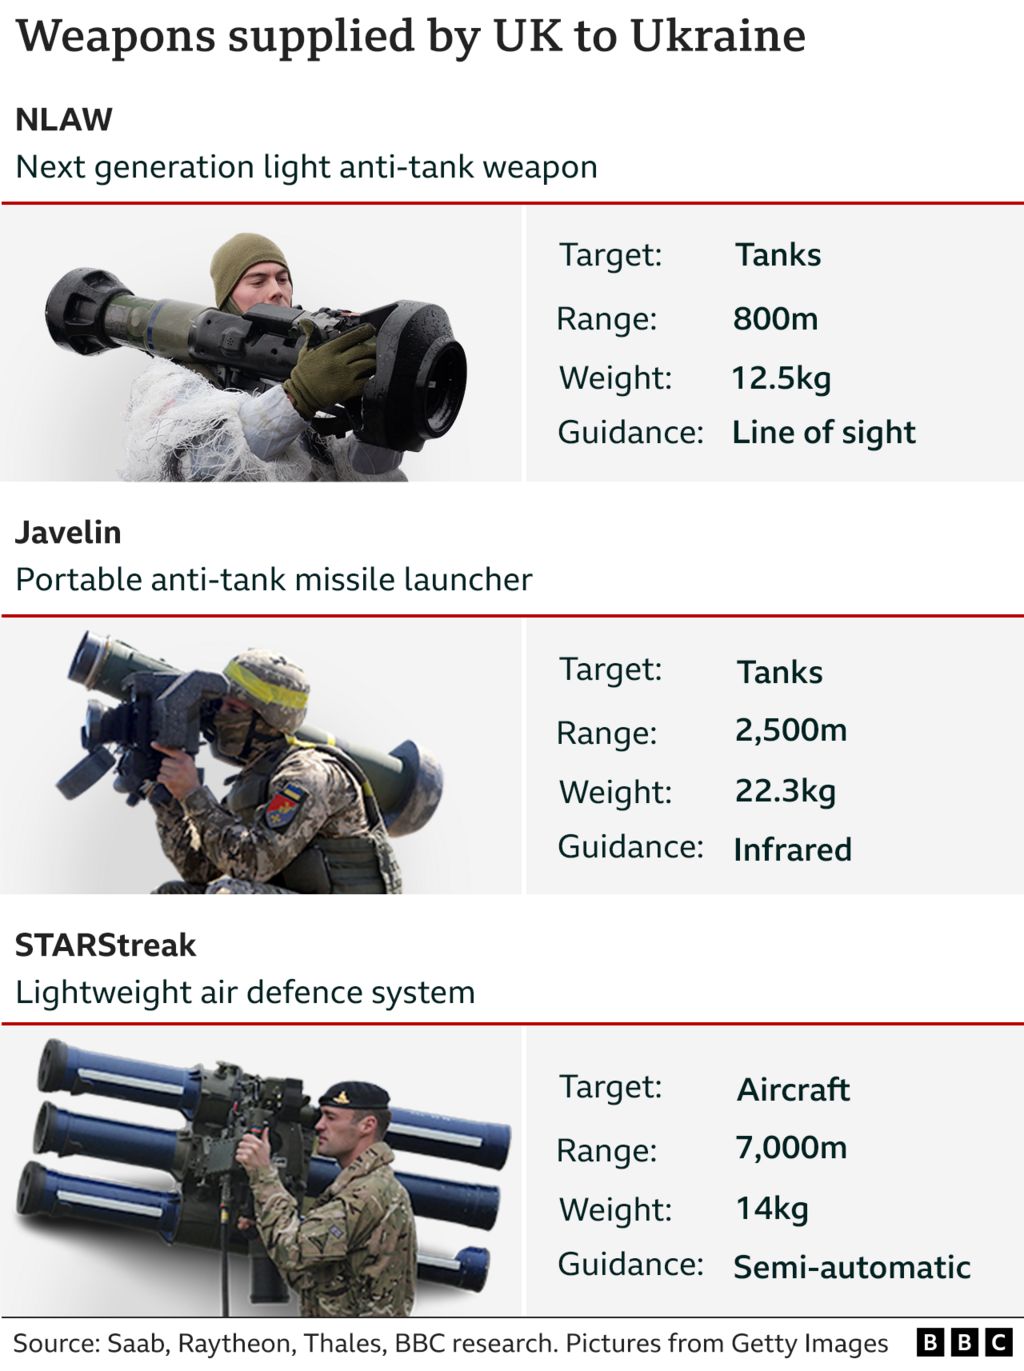 Image shows diagram of different weapons